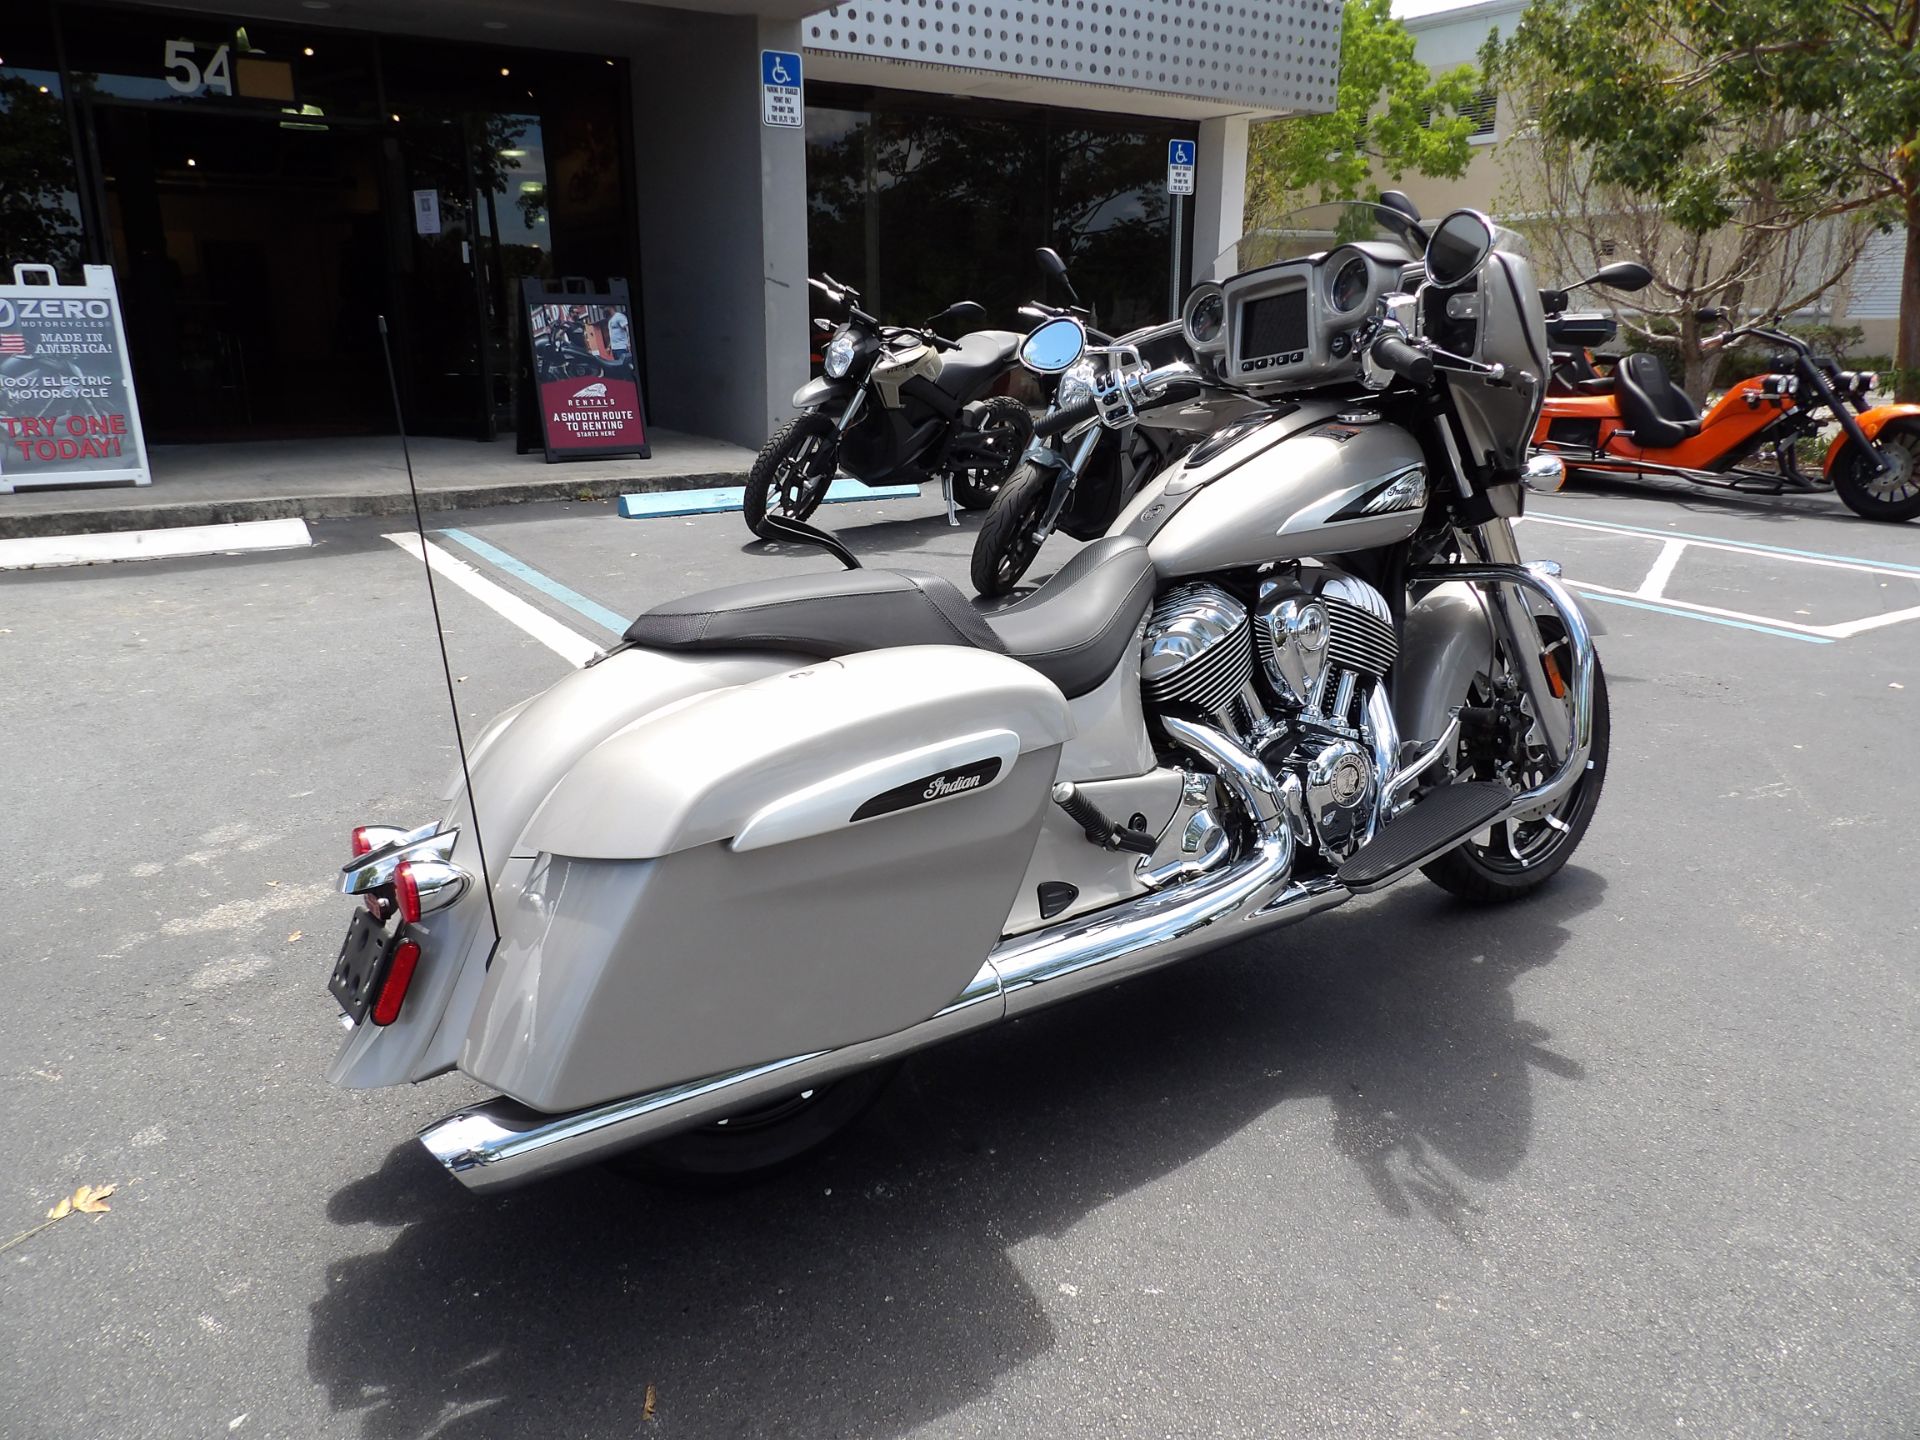 2022 Indian Motorcycle Chieftain® Limited in Fort Lauderdale, Florida - Photo 3